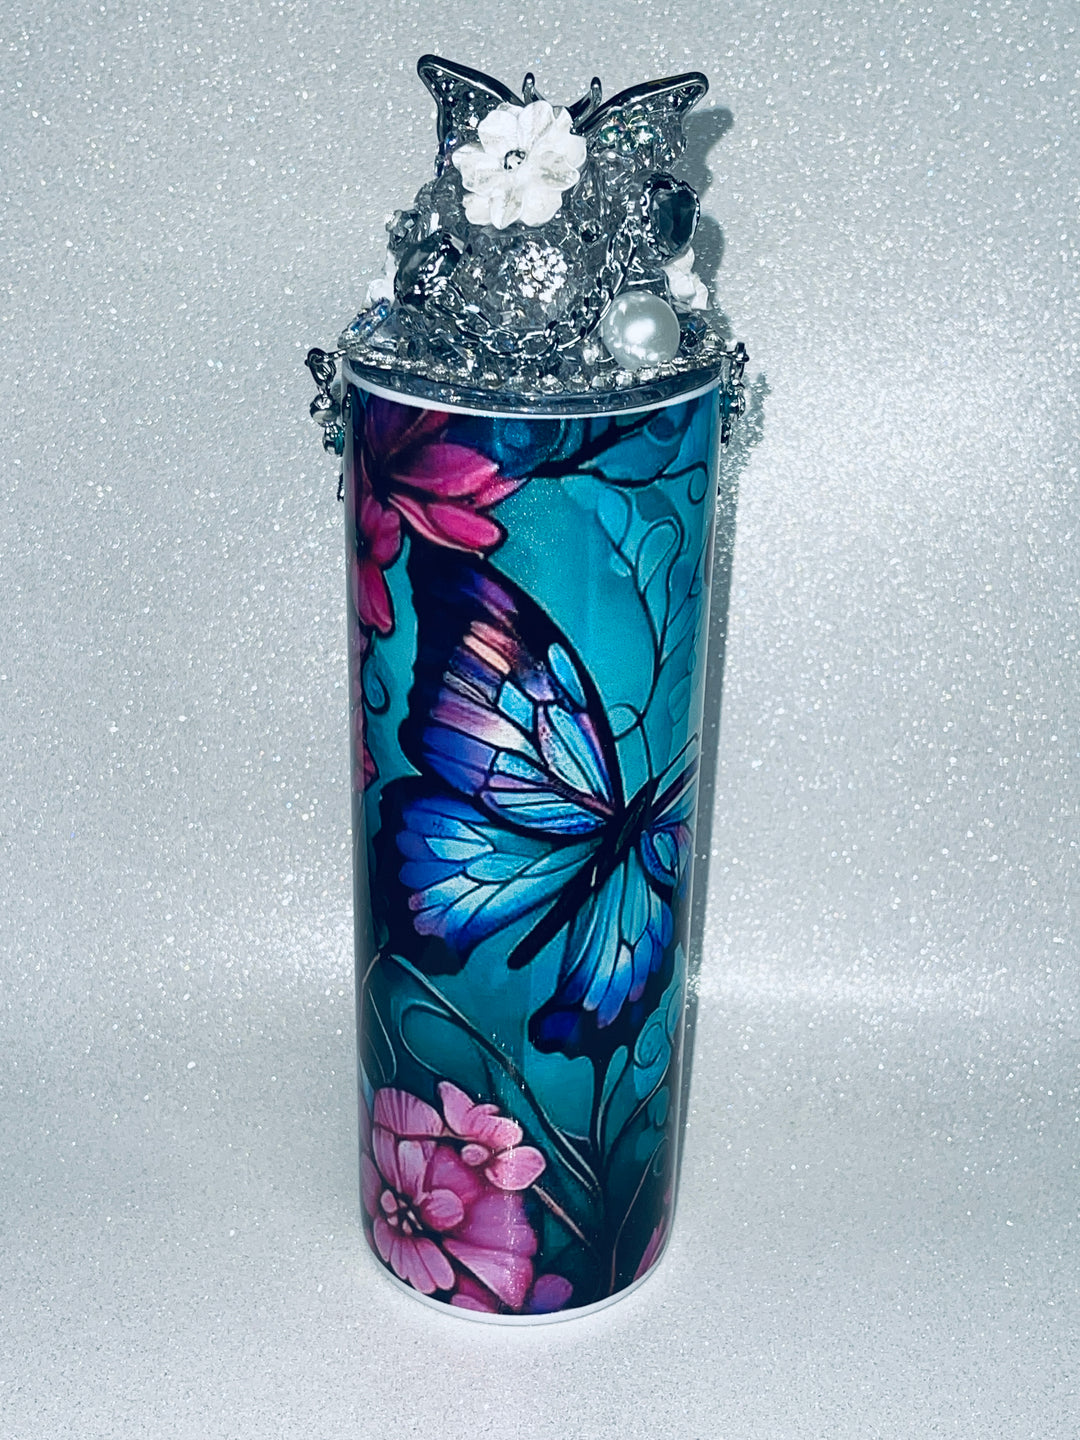 Butterfly Rhinestone Tumbler and Topper with Rhinestone Butterfly Chain Embelishment, Rhinestone Butterflies